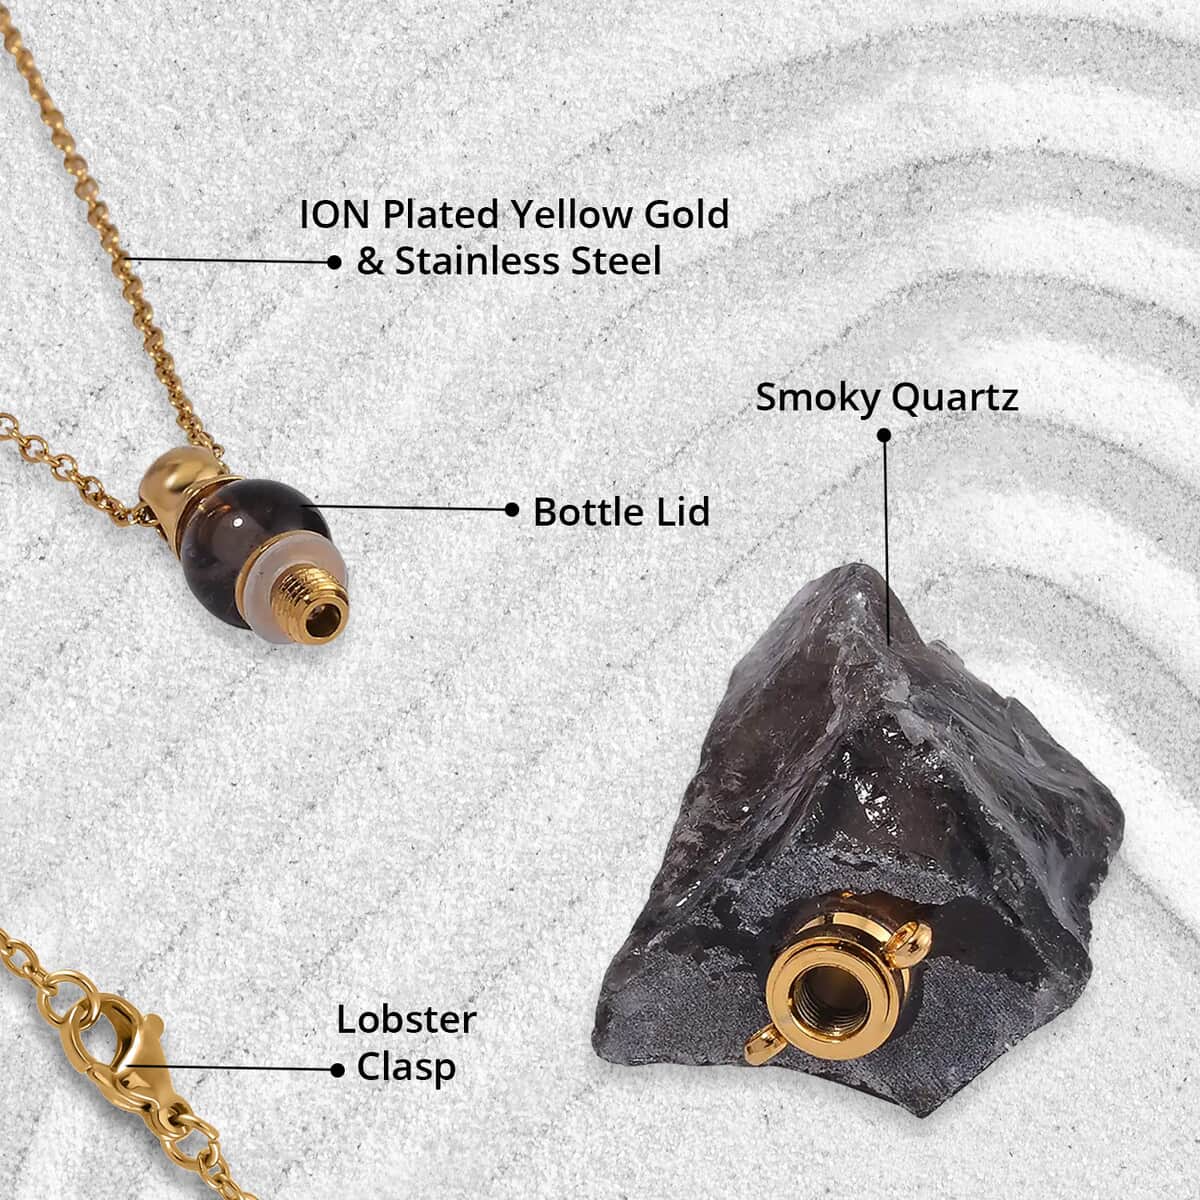 Brazilian Smoky Quartz 100.00 ctw Perfume Bottle Pendant in Goldtone with ION Plated Yellow Gold Stainless Steel Necklace 18-20 Inches image number 4